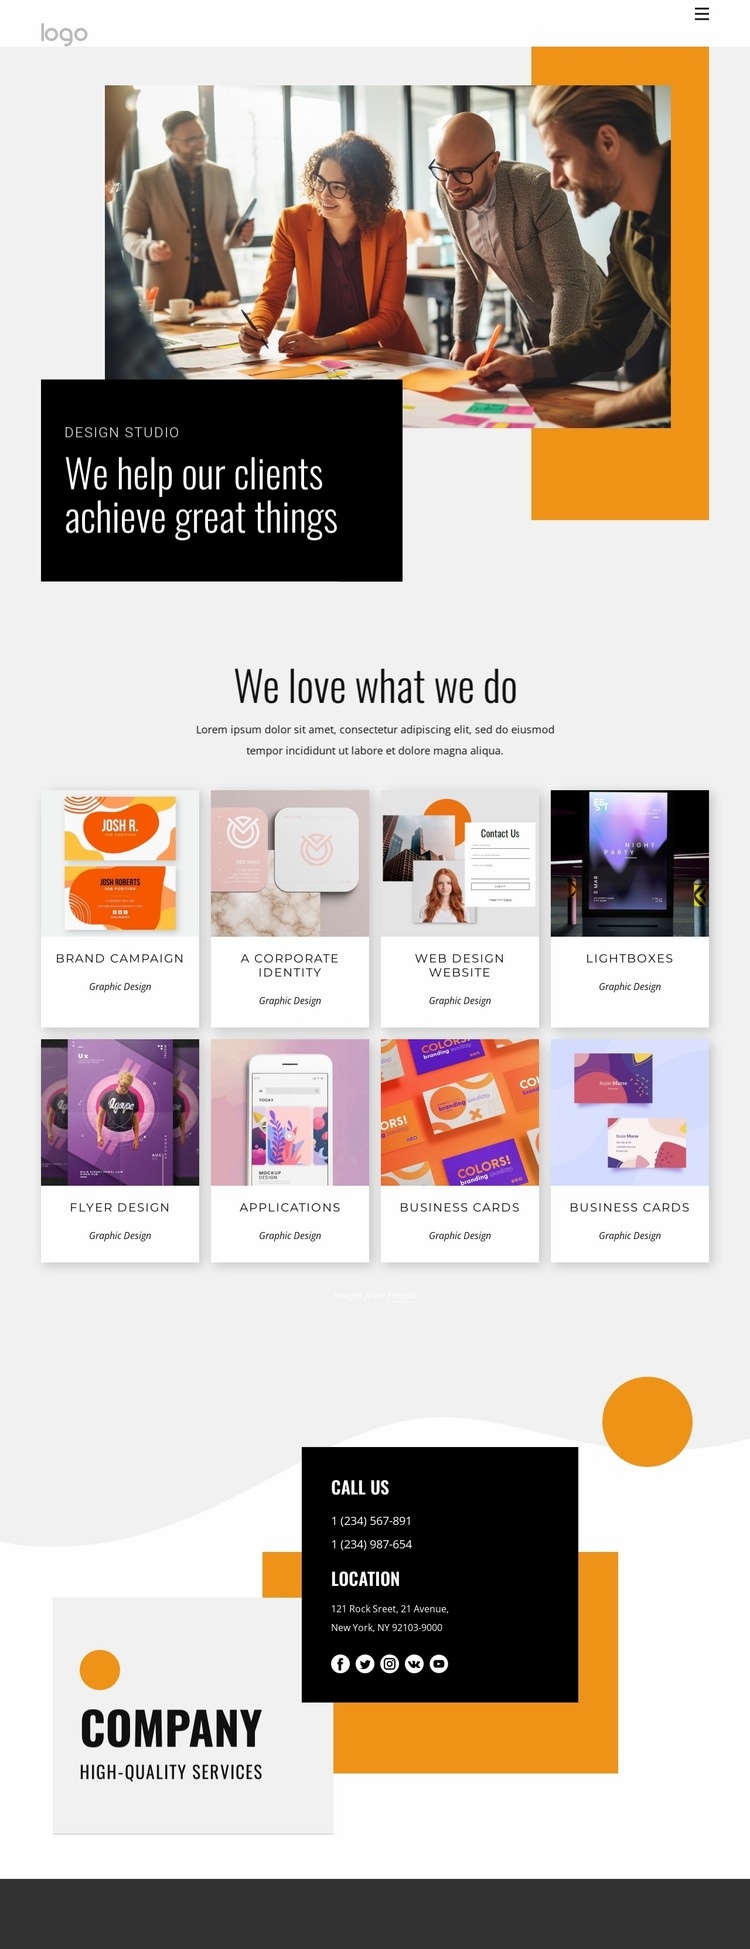 We help our clients achieve great things Webflow Template Alternative